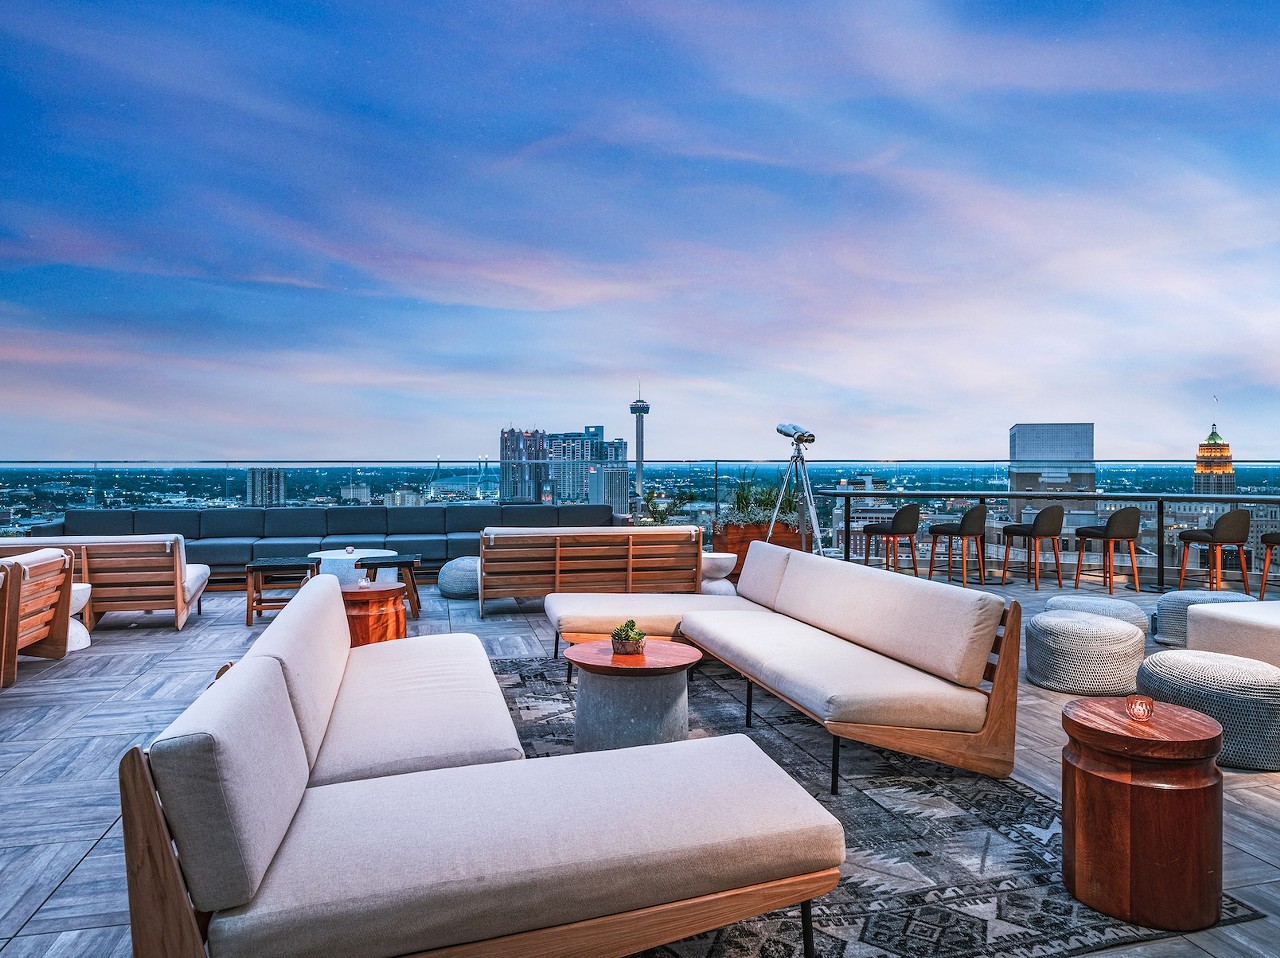 The Moon’s Daughters
115 Lexington Ave, (210) 942-6032, themoonsdaughters.com
This Insta-worthy rooftop bar at the Thompson San Antonio hotel overlooks the city skyline from a twenty-story perch. Indulge in its sophisticated cocktails and delectable chef-prepared bites while getting the perfect shot for a post on the ‘gram.